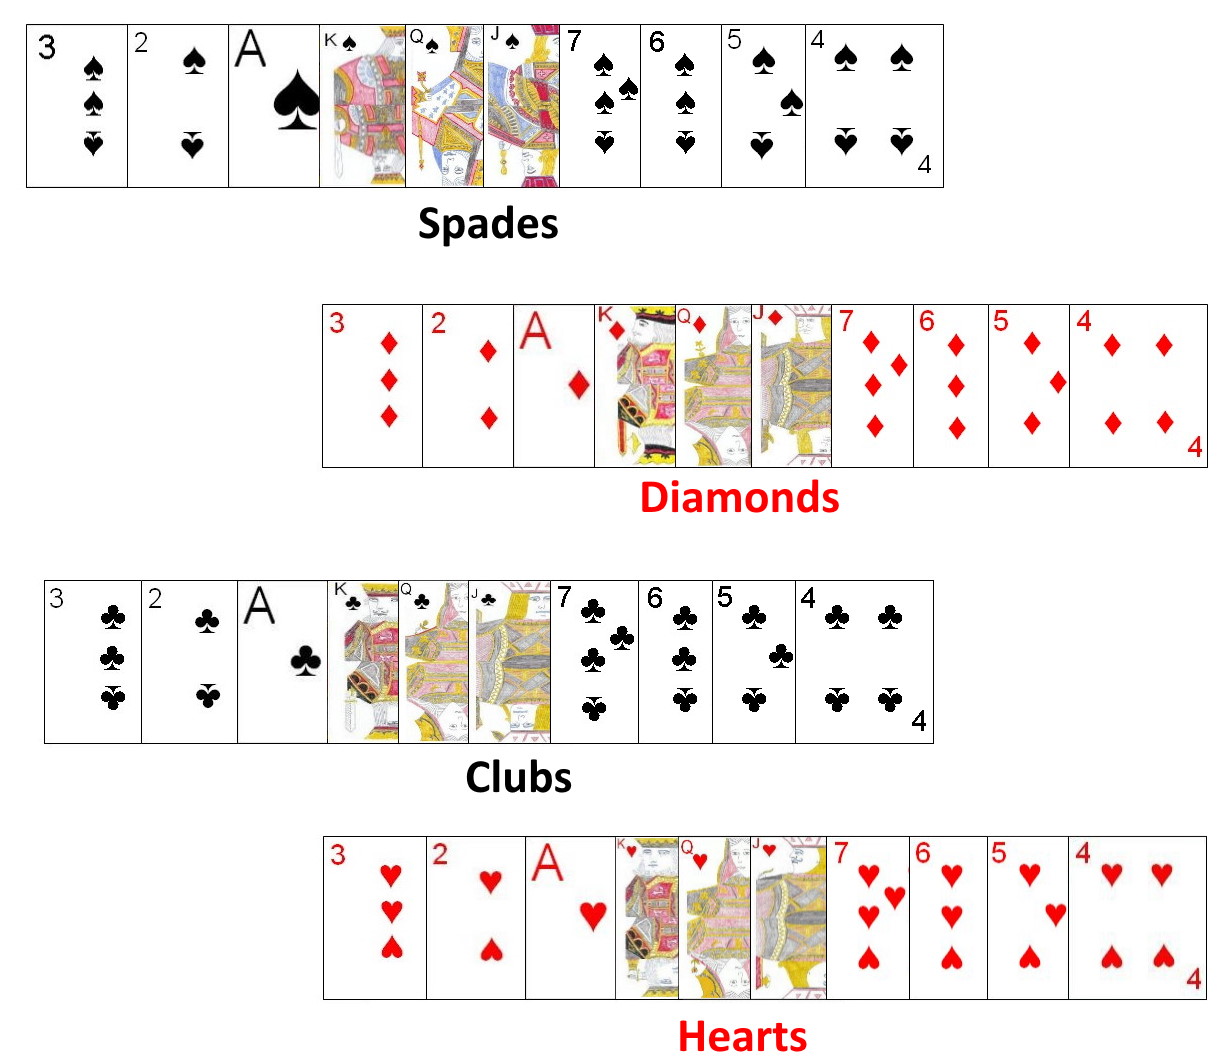 Modified French deck as used for Tressette